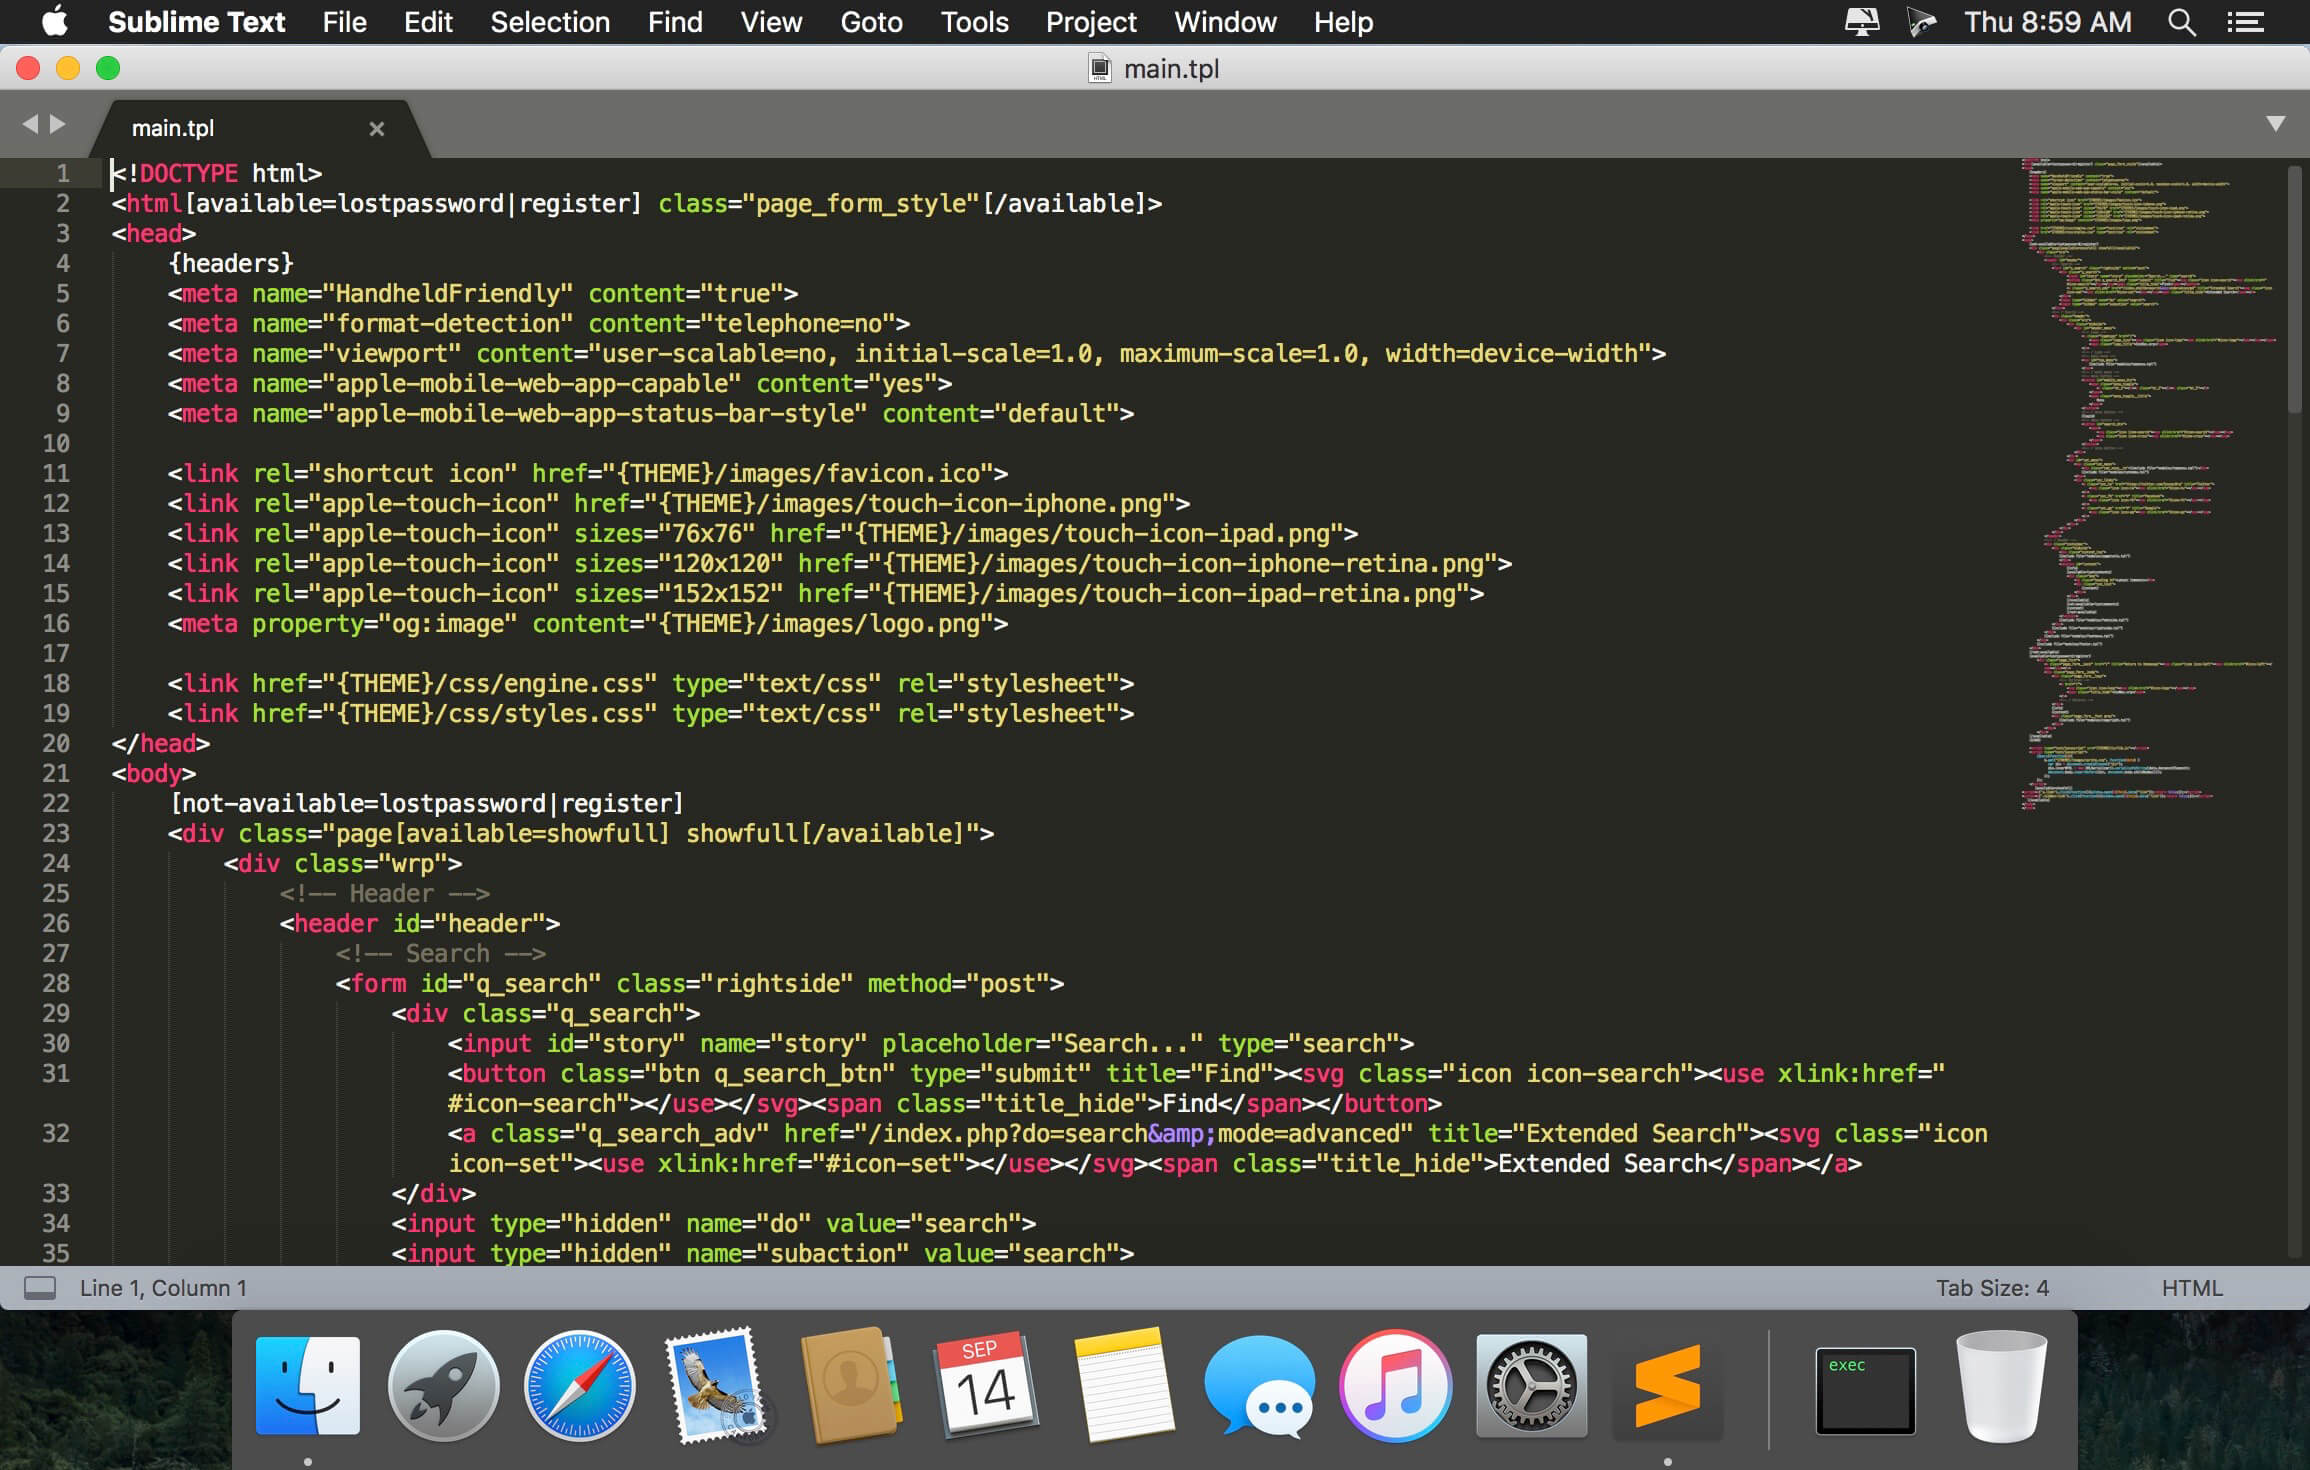 download the last version for android Sublime Text